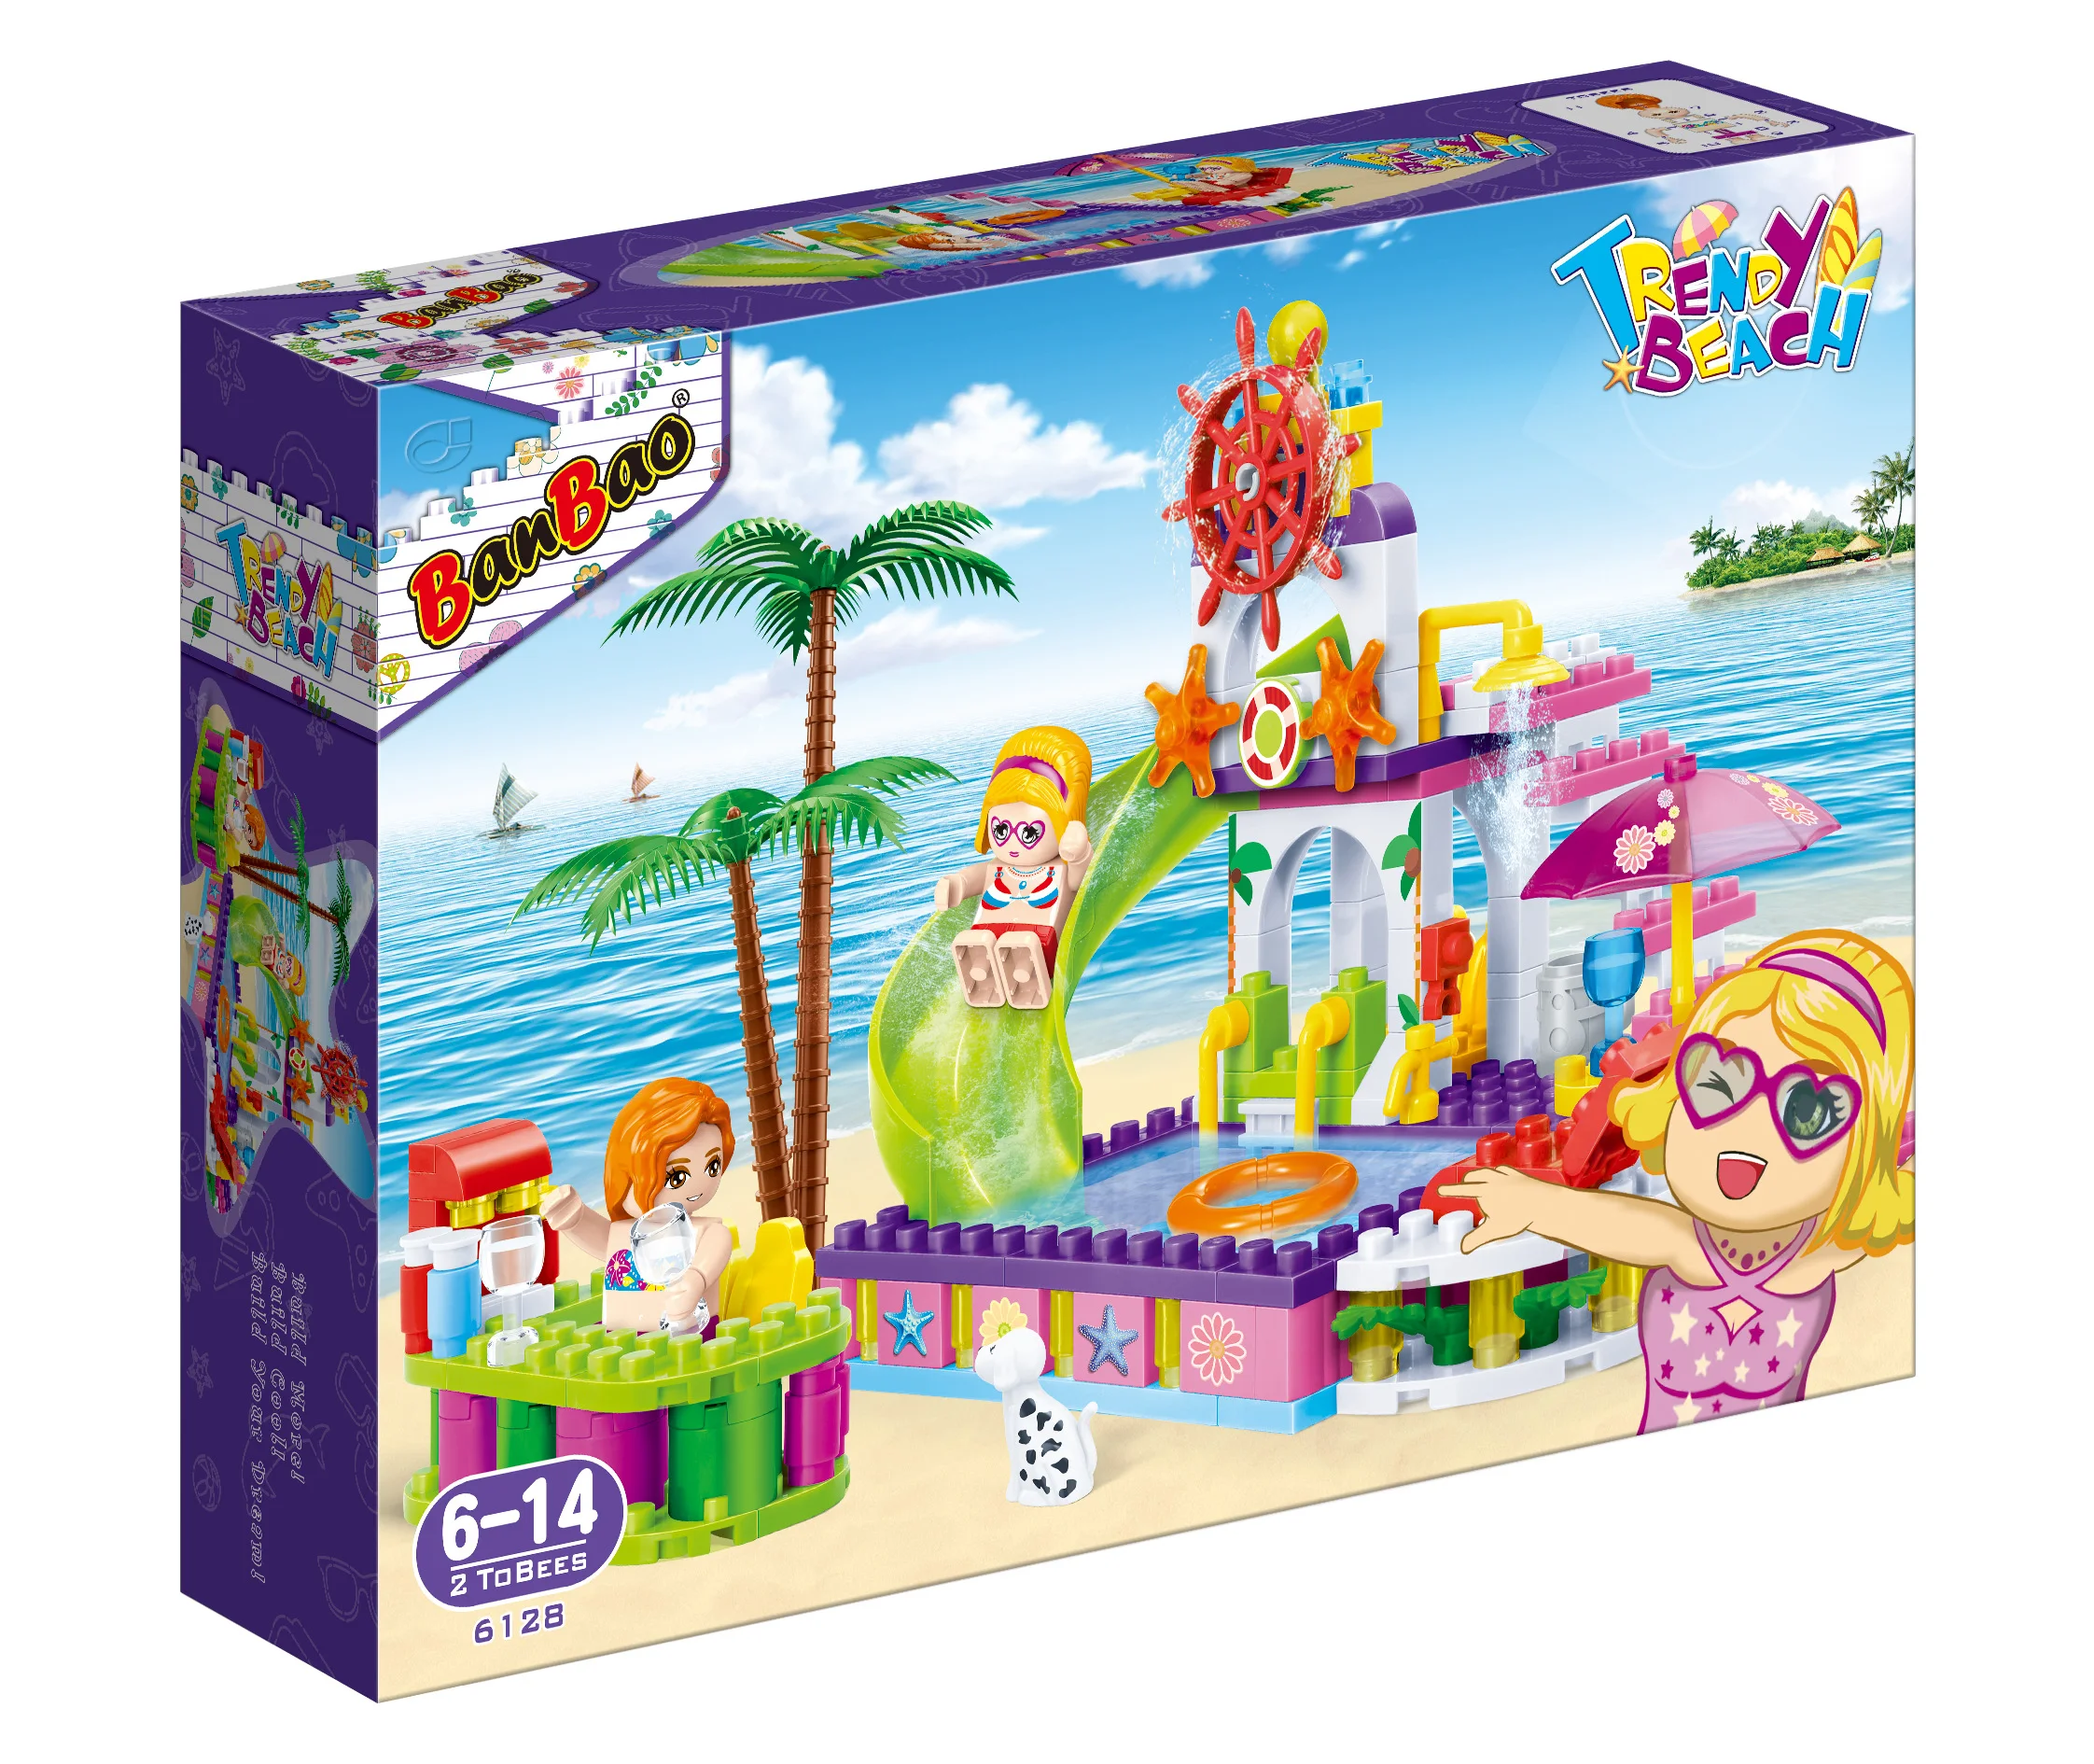 Banbao B6128 6-14 Girl's Summer Beach Party Friend Toys Abs Plastic Building Blocks Compatible Major Brand Brick For - Buy Building Block Toys,Swimming Pool Summer Beach Playable Block Toys 6-14 Building